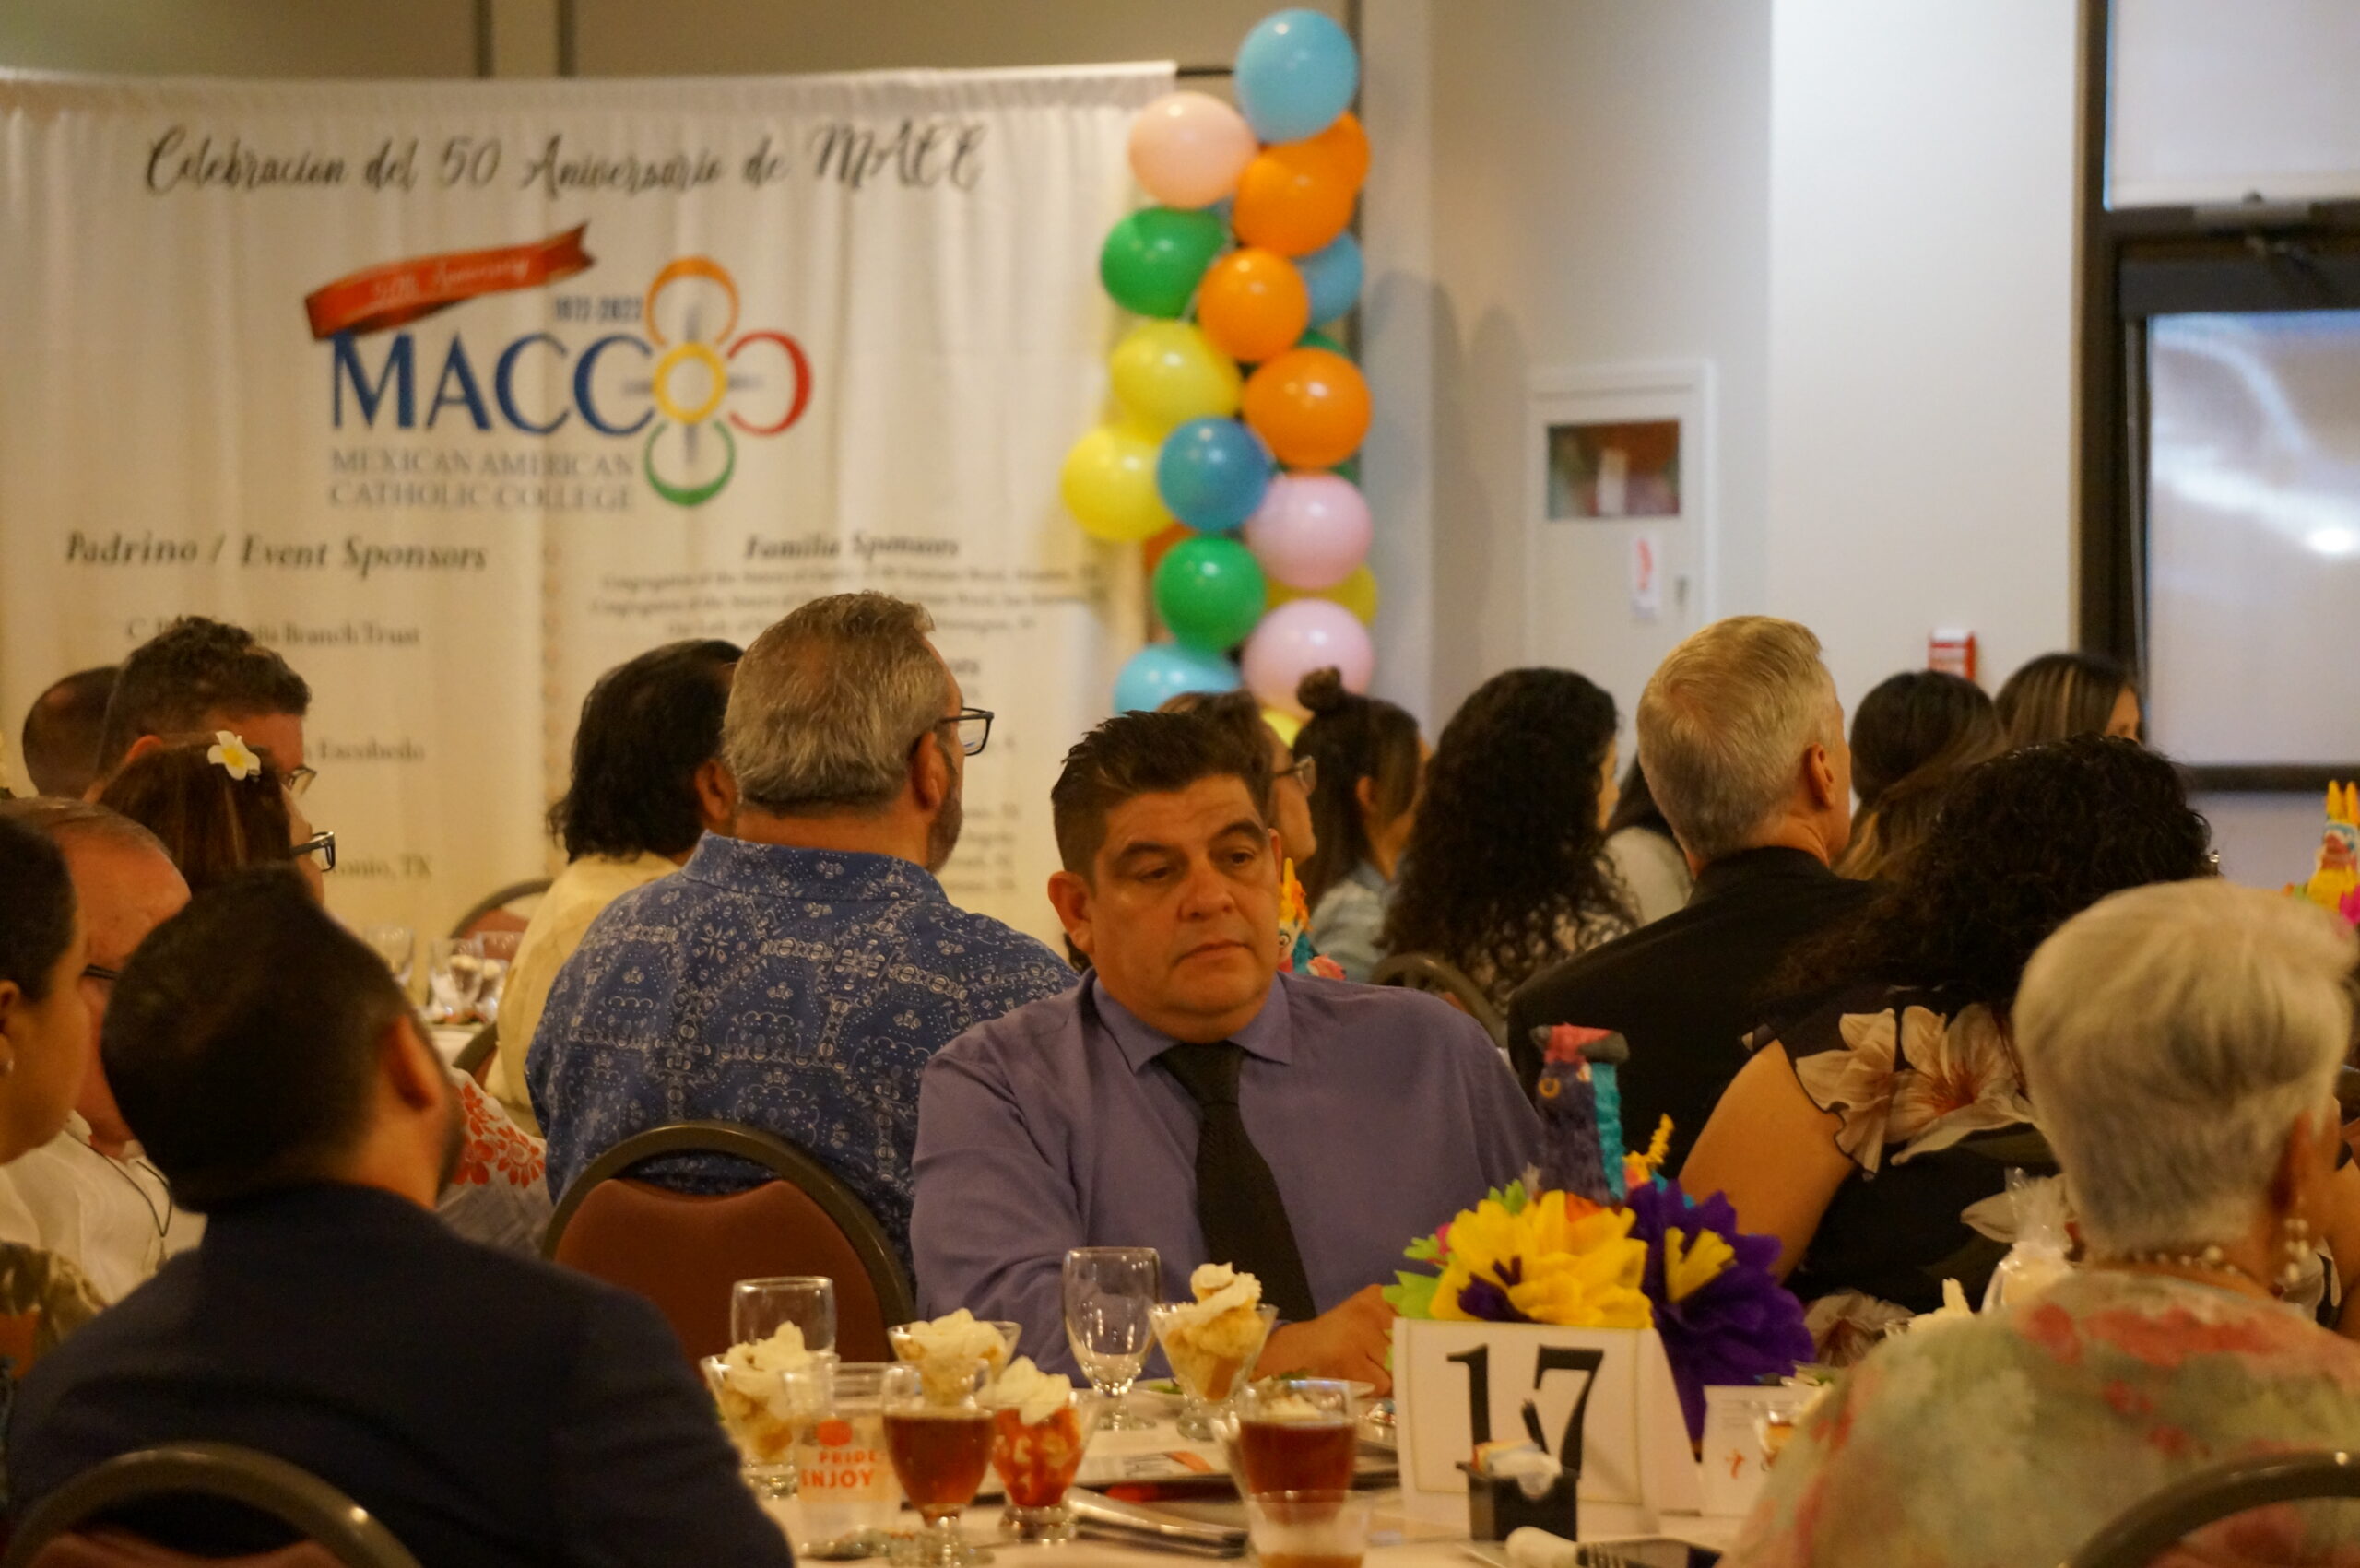 MACC anniversary gala celebrates the past and envisions the future